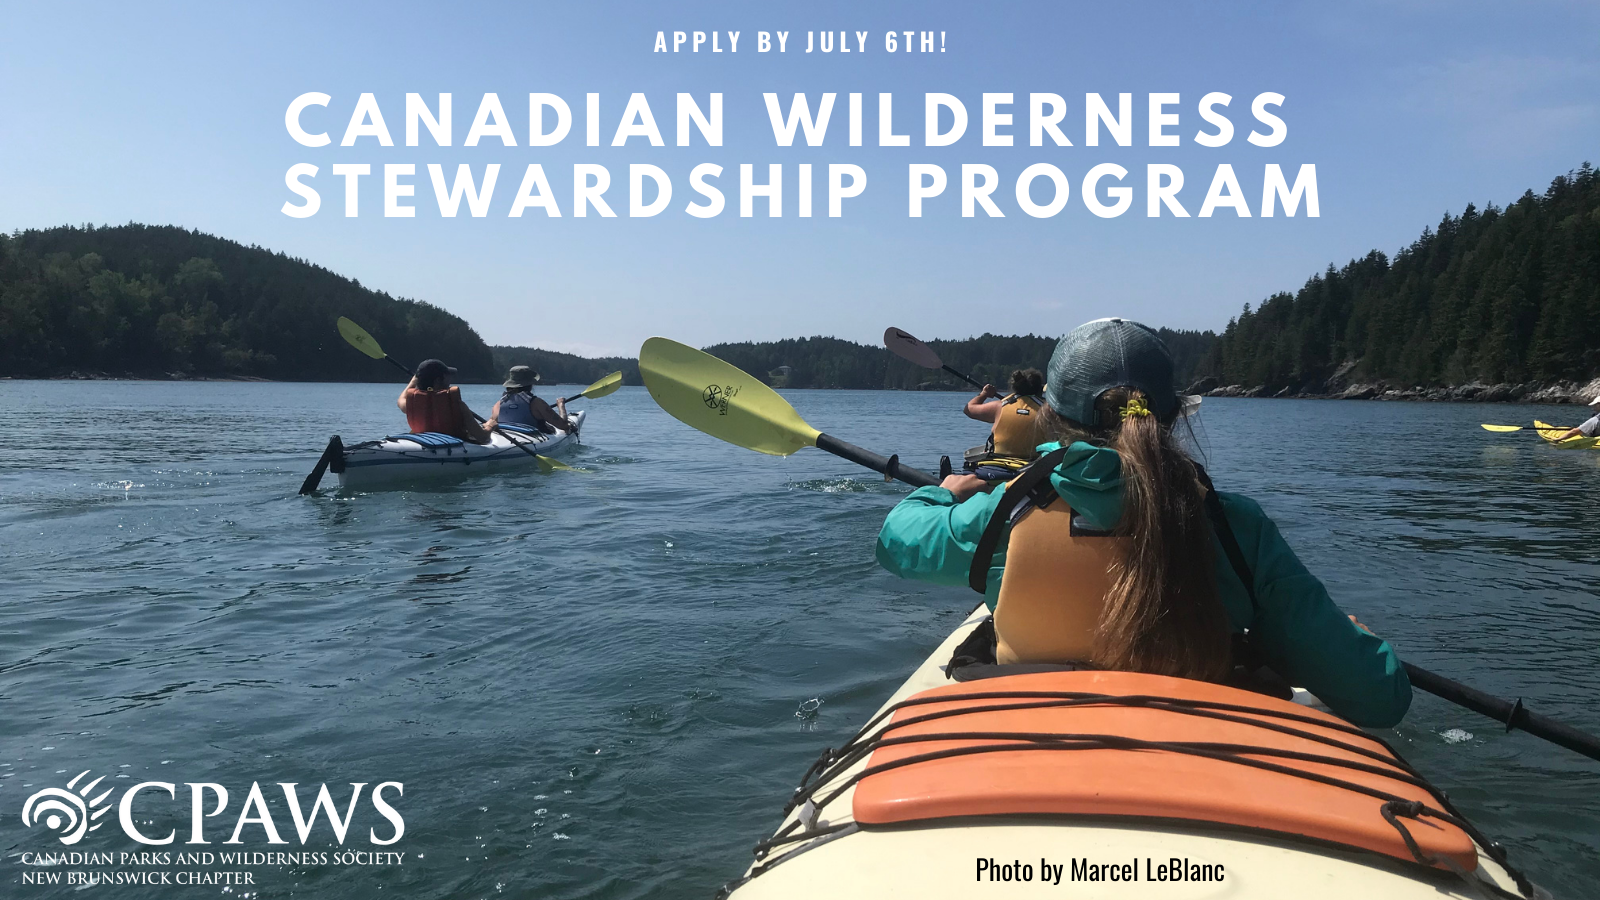 Image of Kayakers paddling with text that reads Apply by July 6th Canadian Wilderness Stewardship Program, Canadian Parks and Wilderness Society New Brunswick Chapter